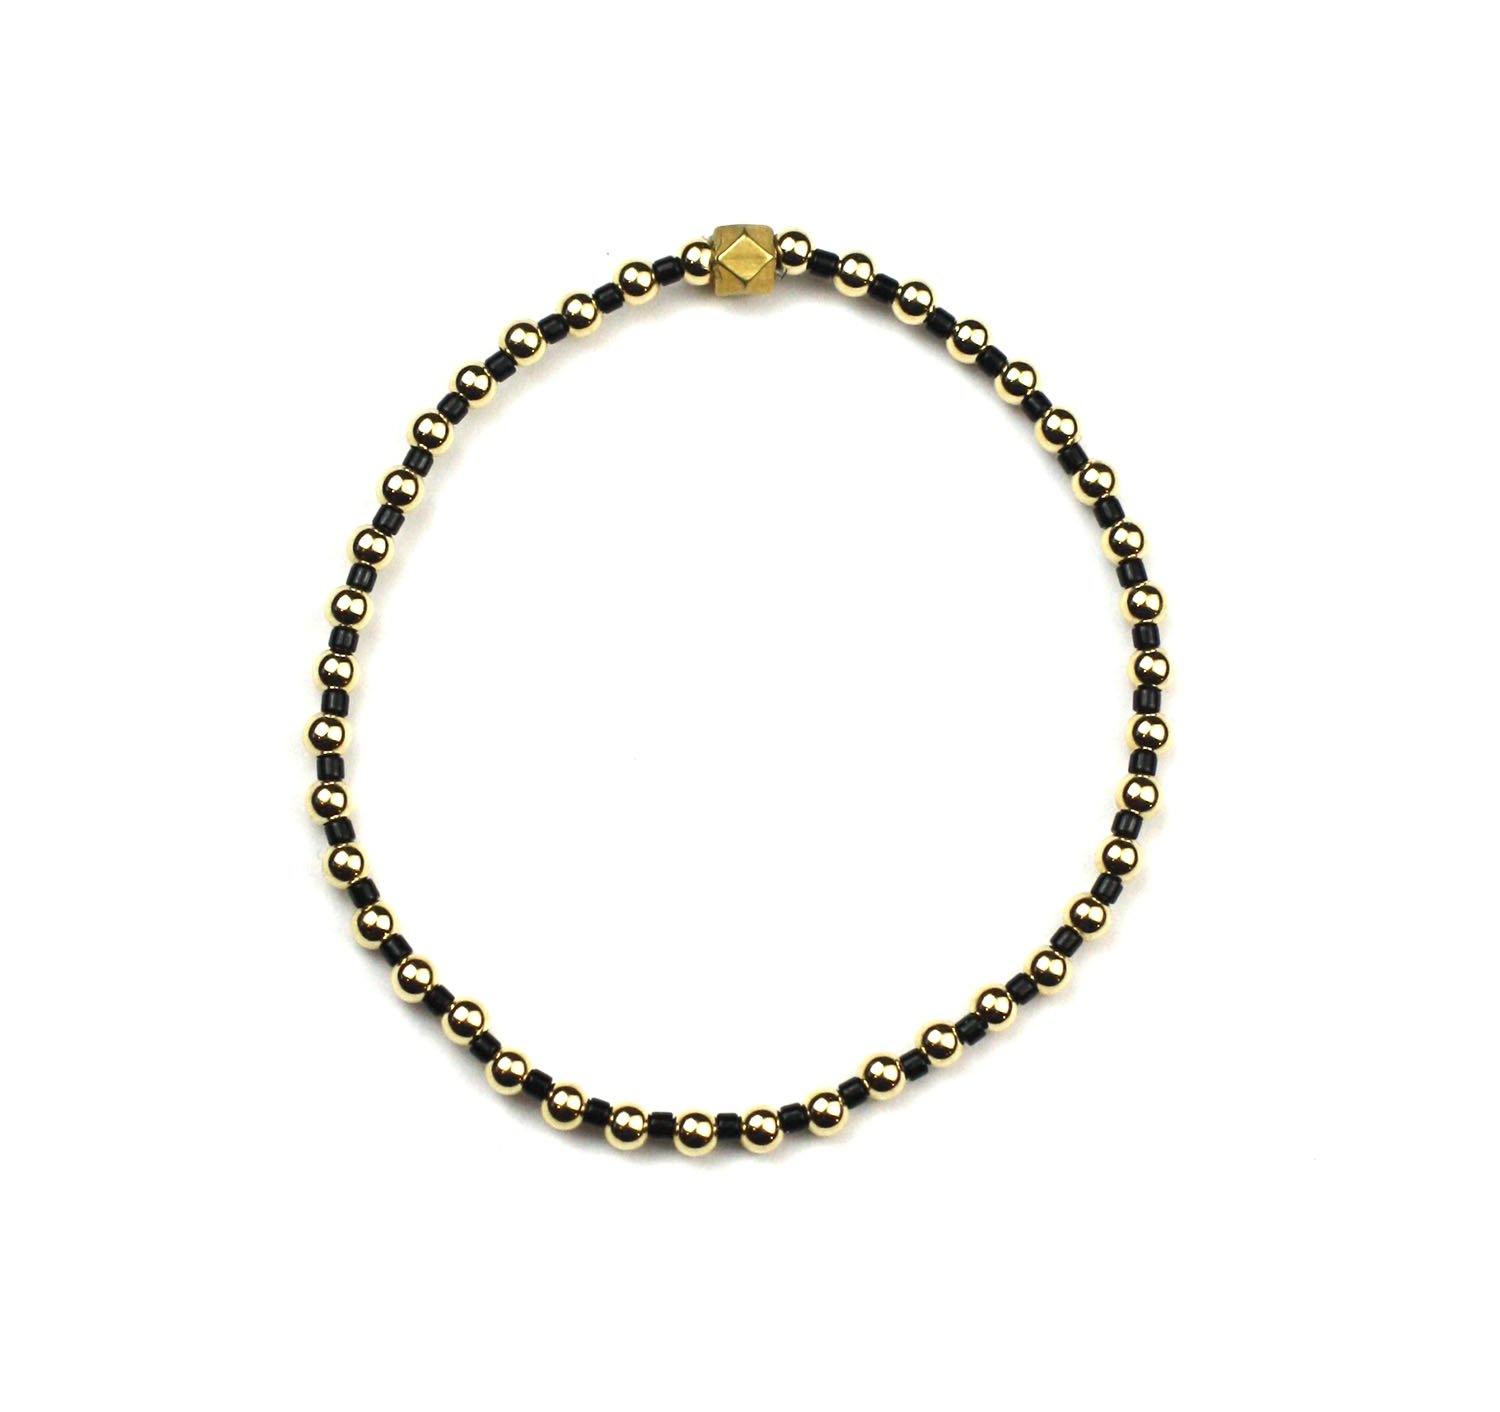 18K Solid Yellow Gold Double Strand Mangalsutra Bracelet With - Etsy | Gold  bracelet chain, Black beaded bracelets, Mangalsutra bracelet